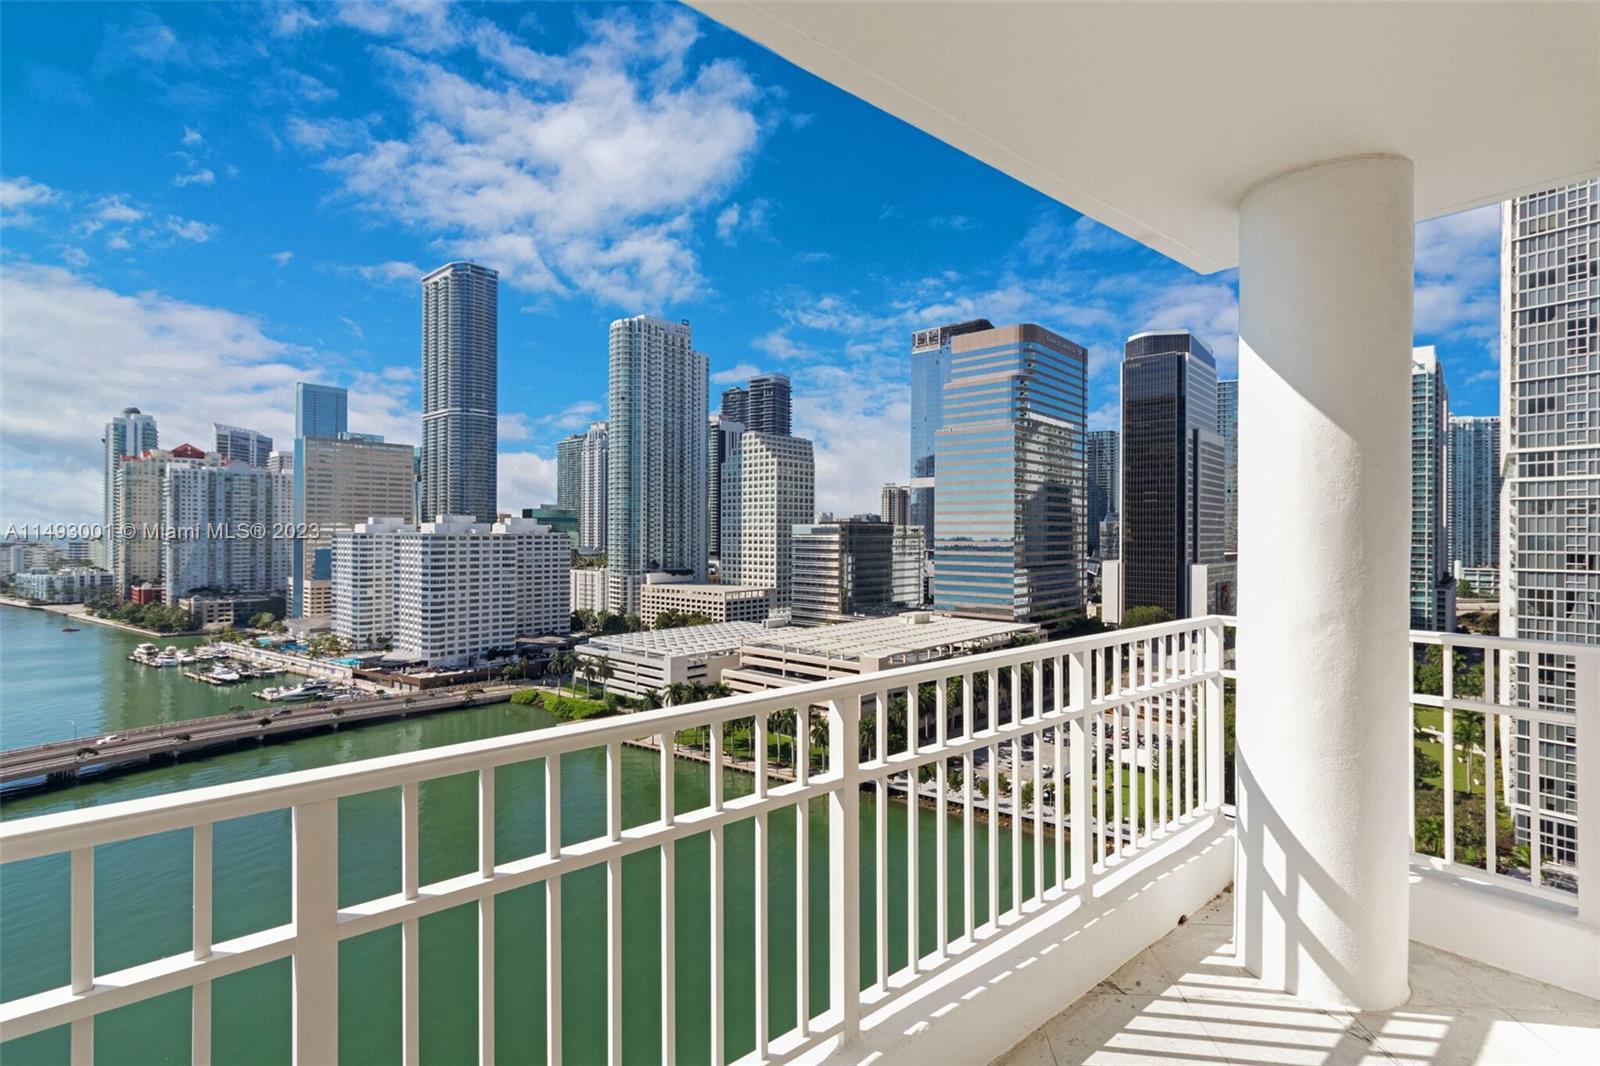 Enjoy DIRECT BAY VIEWS, River views, and the Brickell skyline from this spacious 3 bedroom 2.5 bath located on exclusive Brickell Key. Community feels like no other! Unit 2103 features a beautiful and functional layout with spacious living room, separate dining areas, gally kitchen with room for breakfast table, split bedroom plan, plenty of closet space, laundry in unit, and two large balconies. Rental price includes two covered assigned parking spaces, water, trash, sewer, plus all the amazing amenities: swimming pool with water views, hot tub, sundeck with gas grill, basketball court, kids playroom, a two-level health club, spa, billiards, business Center, 24-hour security, concierge, and valet services. Call or text Jenn for a private showing. Comes furnished or unfurnished.